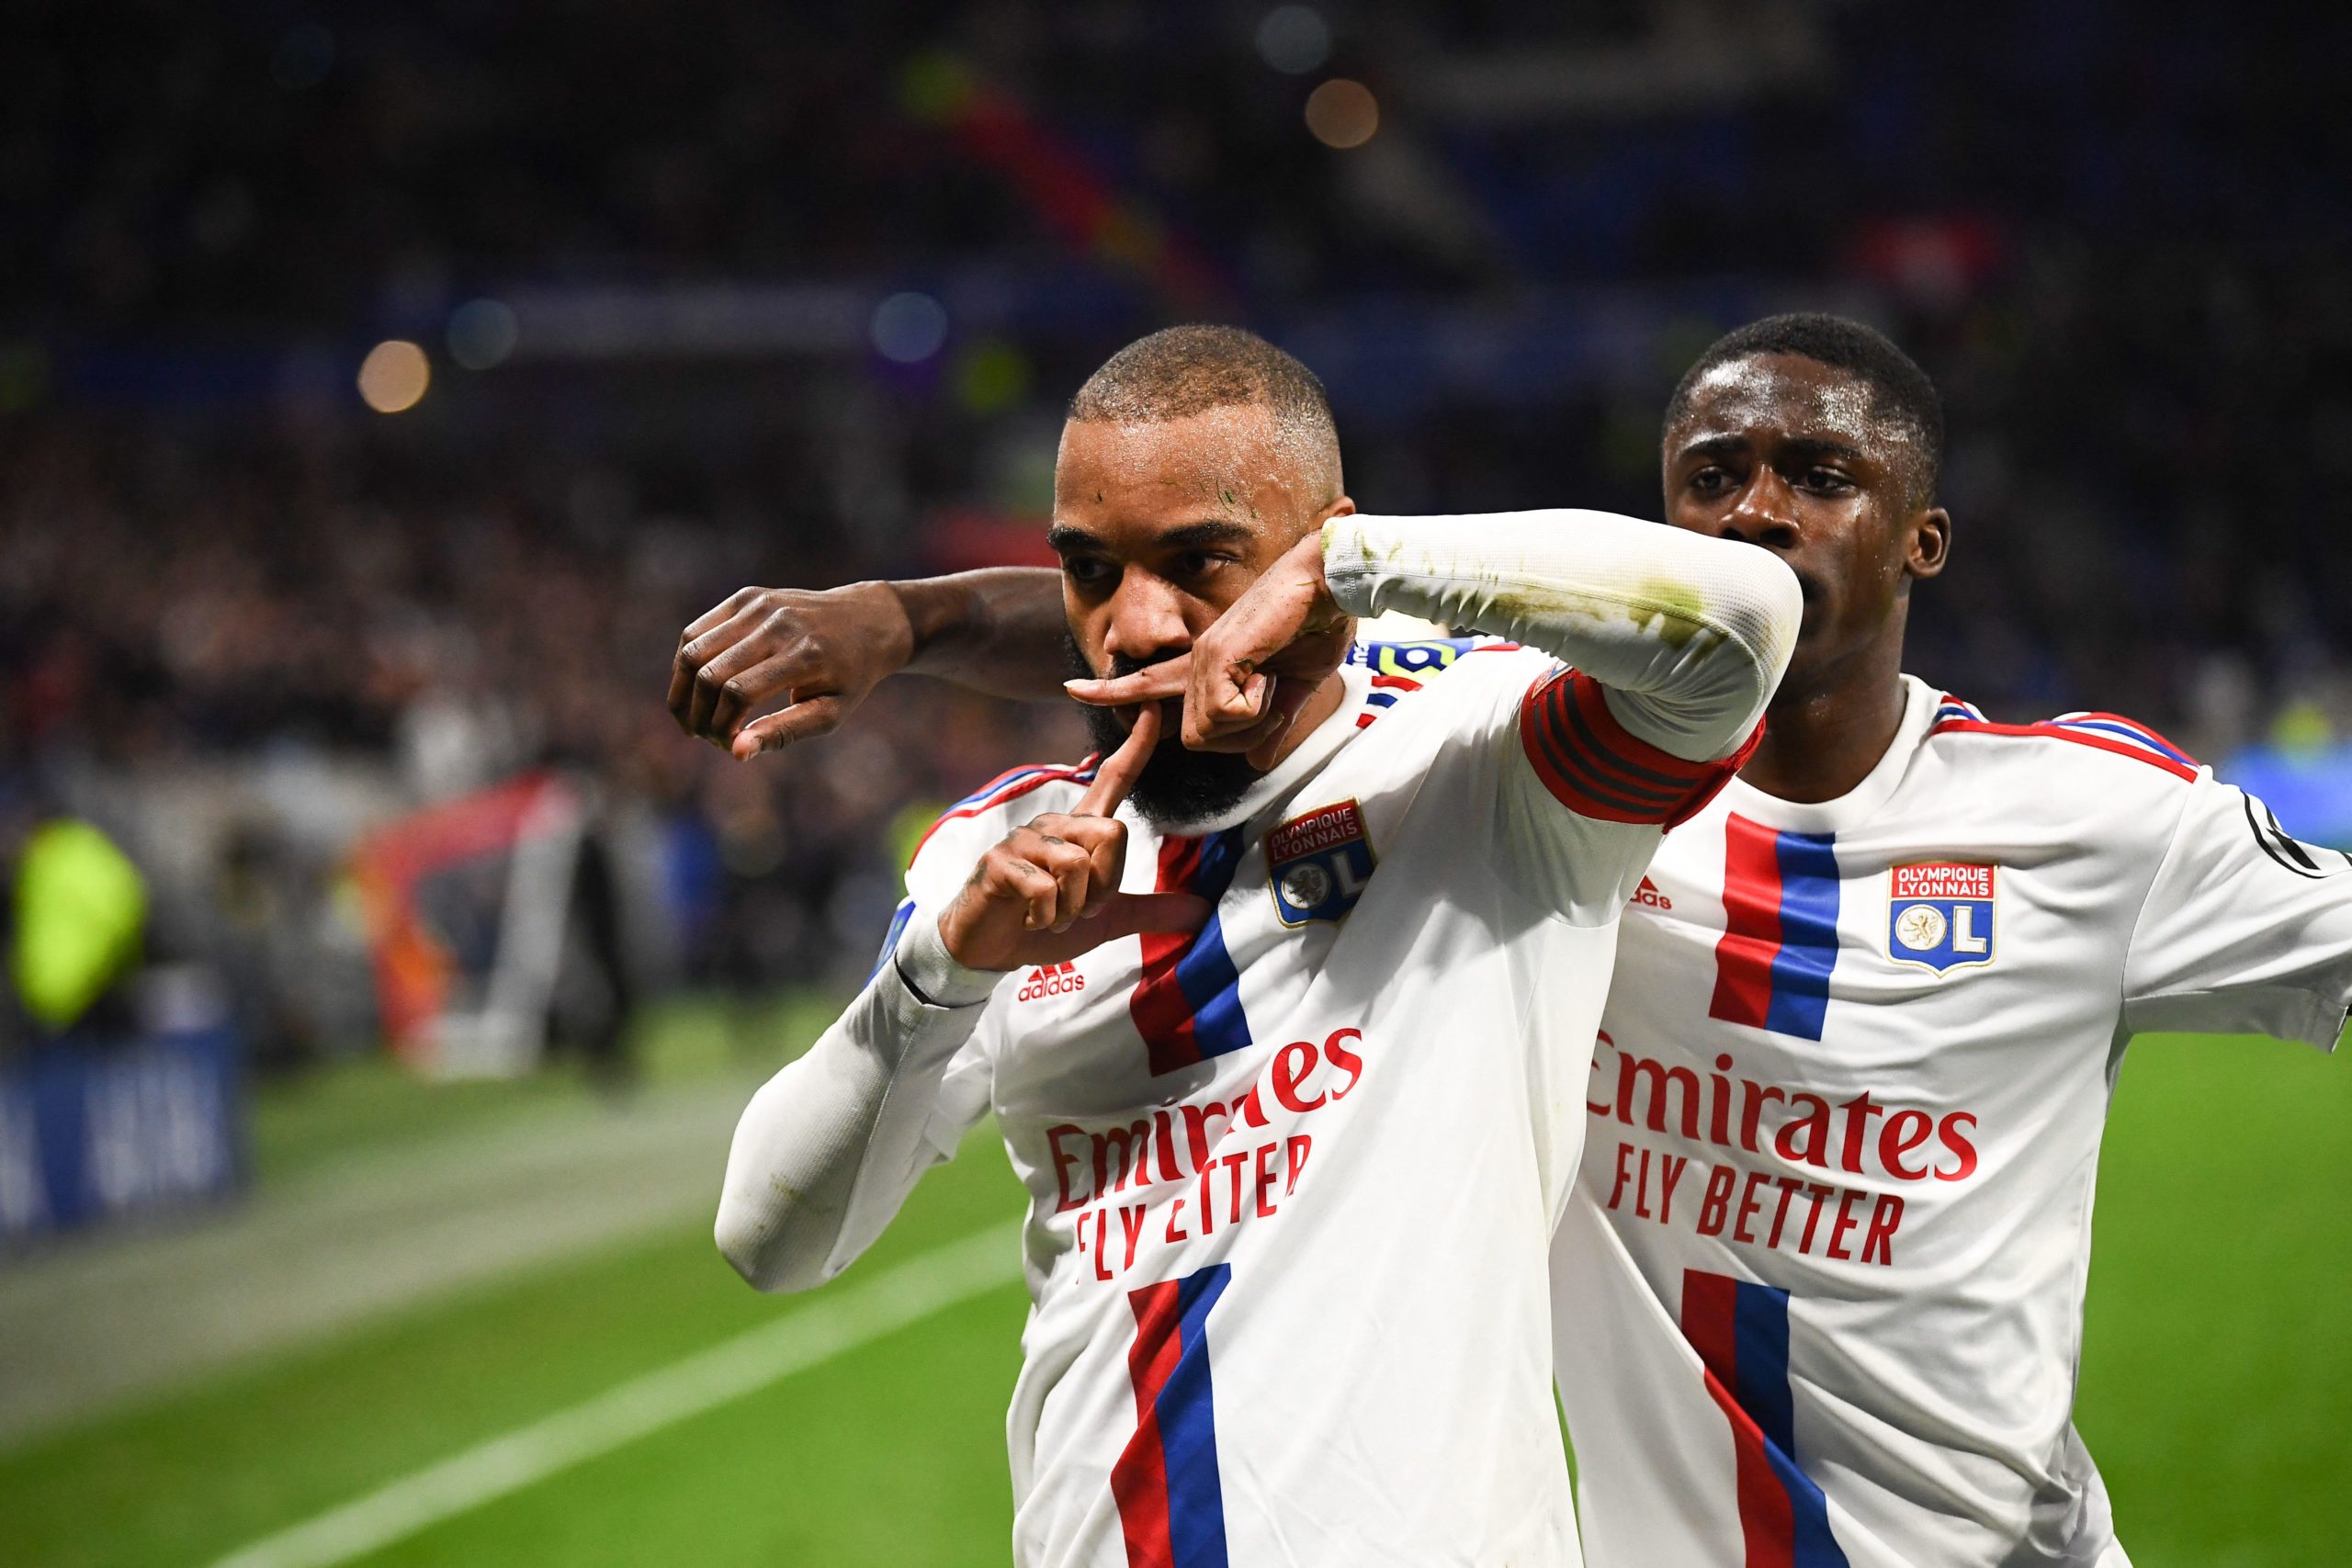 Olympique Lyonnais' Alexandre Lacazette (L) celebrates scoring against FC Nantes in a French L1 football match at The Groupama Stadium in Decines-Charpieu, central-eastern France on March 17, 2023. (Credit: OLIVIER CHASSIGNOLE/AFP via Getty Images)